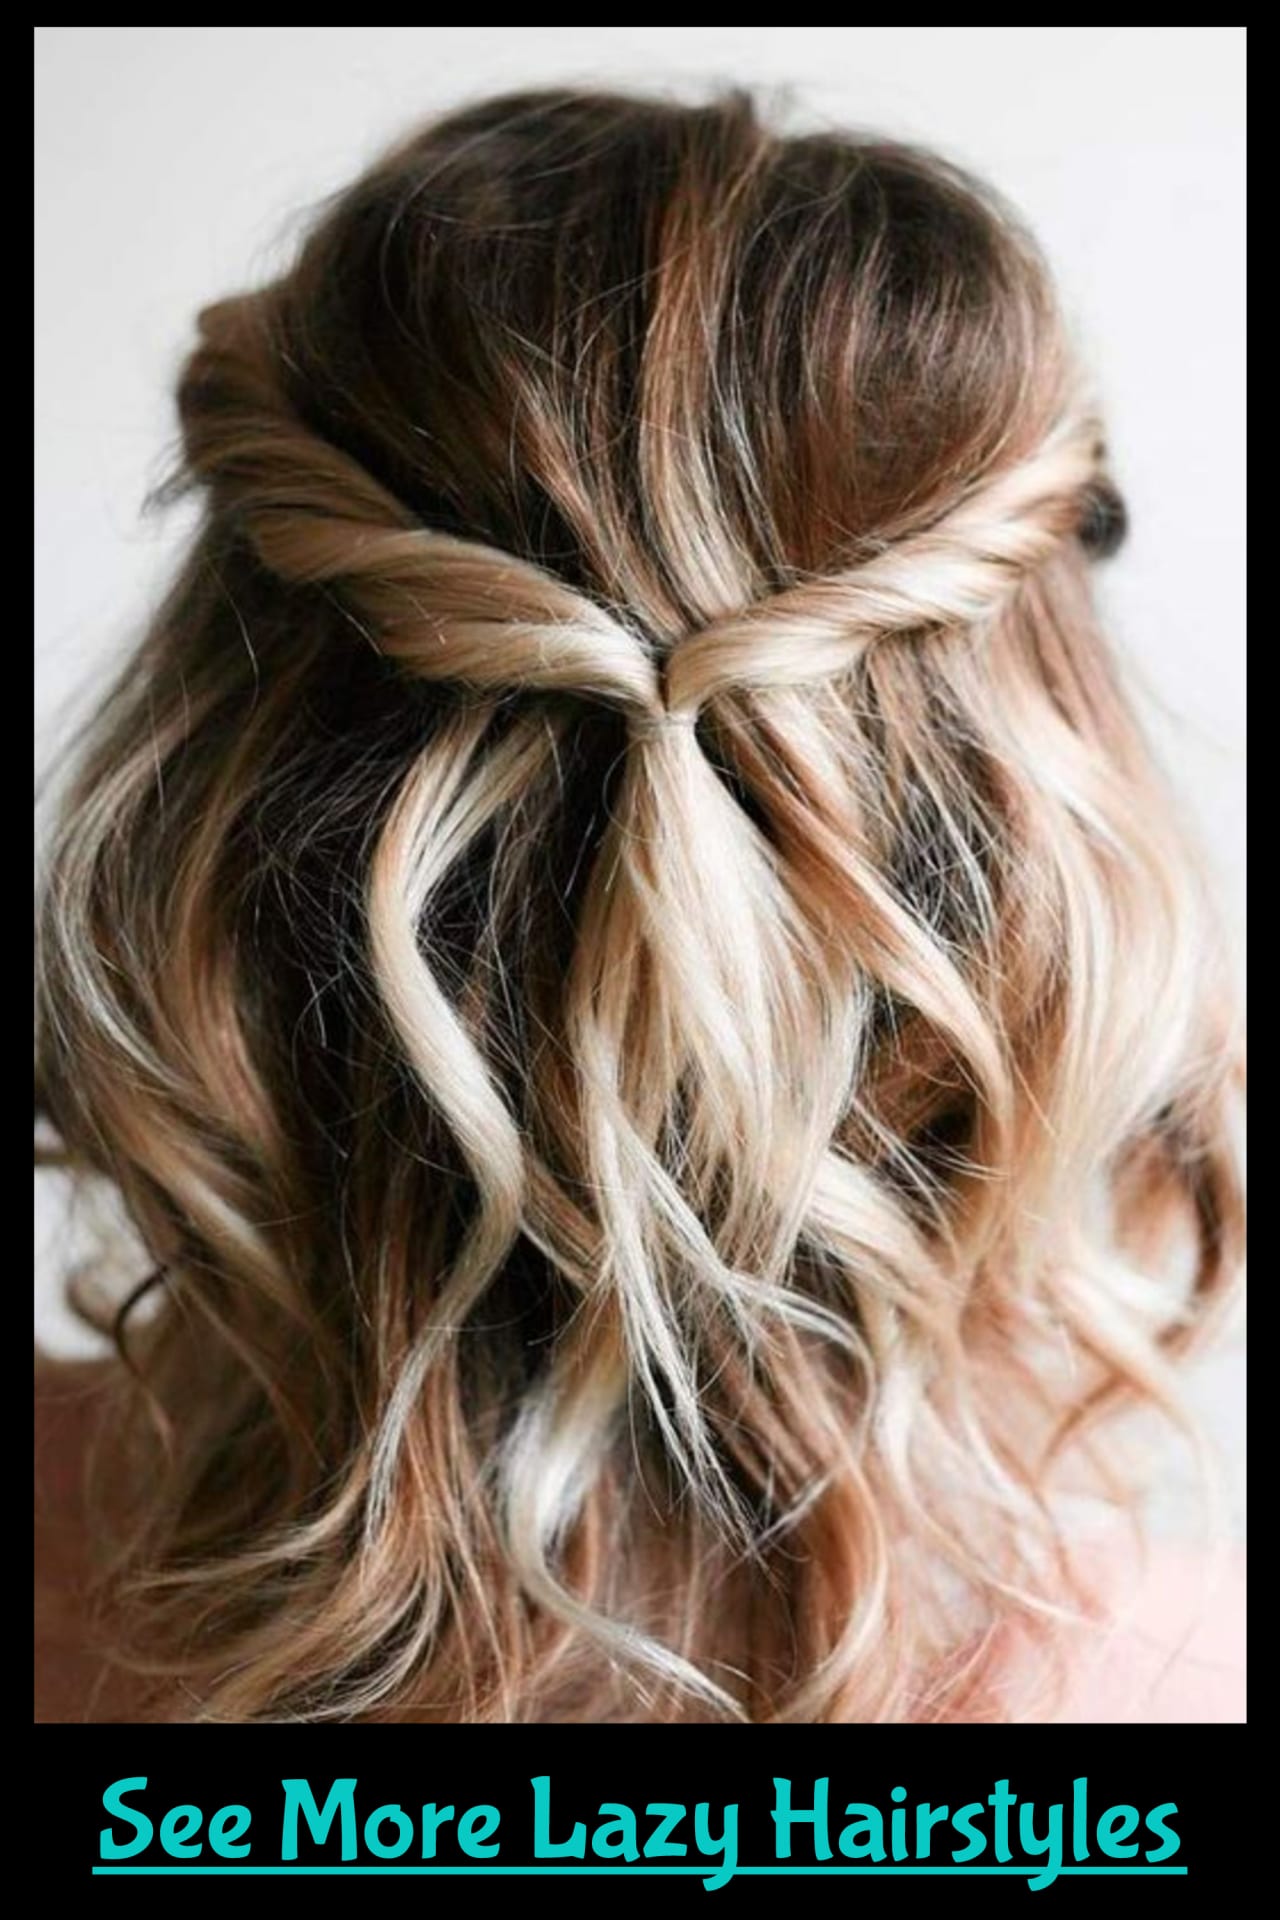 MORE lazy hairstyles for lazy girls!  Easy hairstyle ideas and tutorials